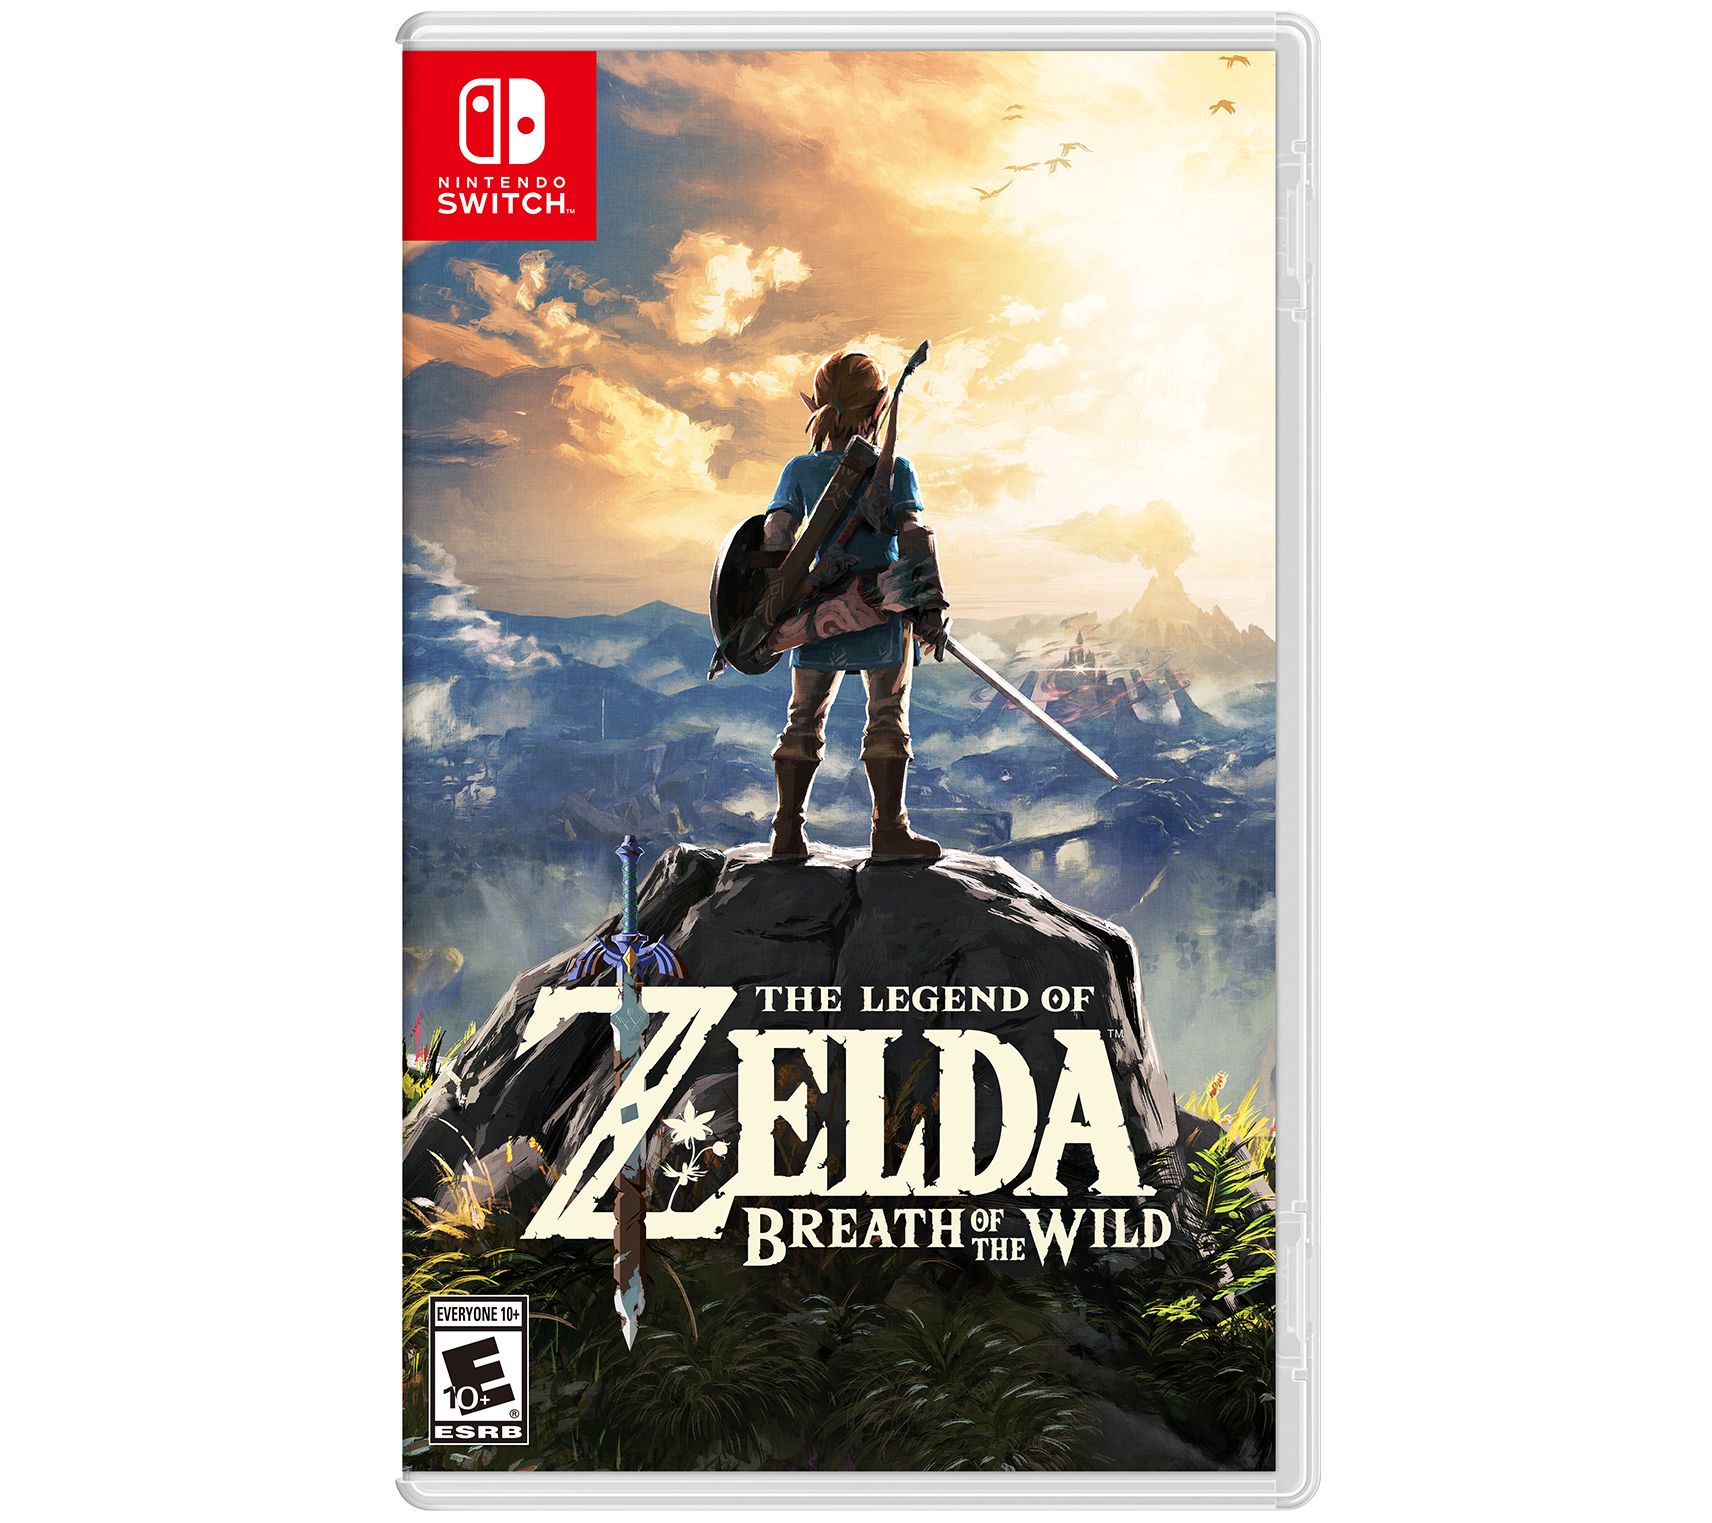 The Legend of Zelda: Breath of the Wild - Strategy Guide on Apple Books